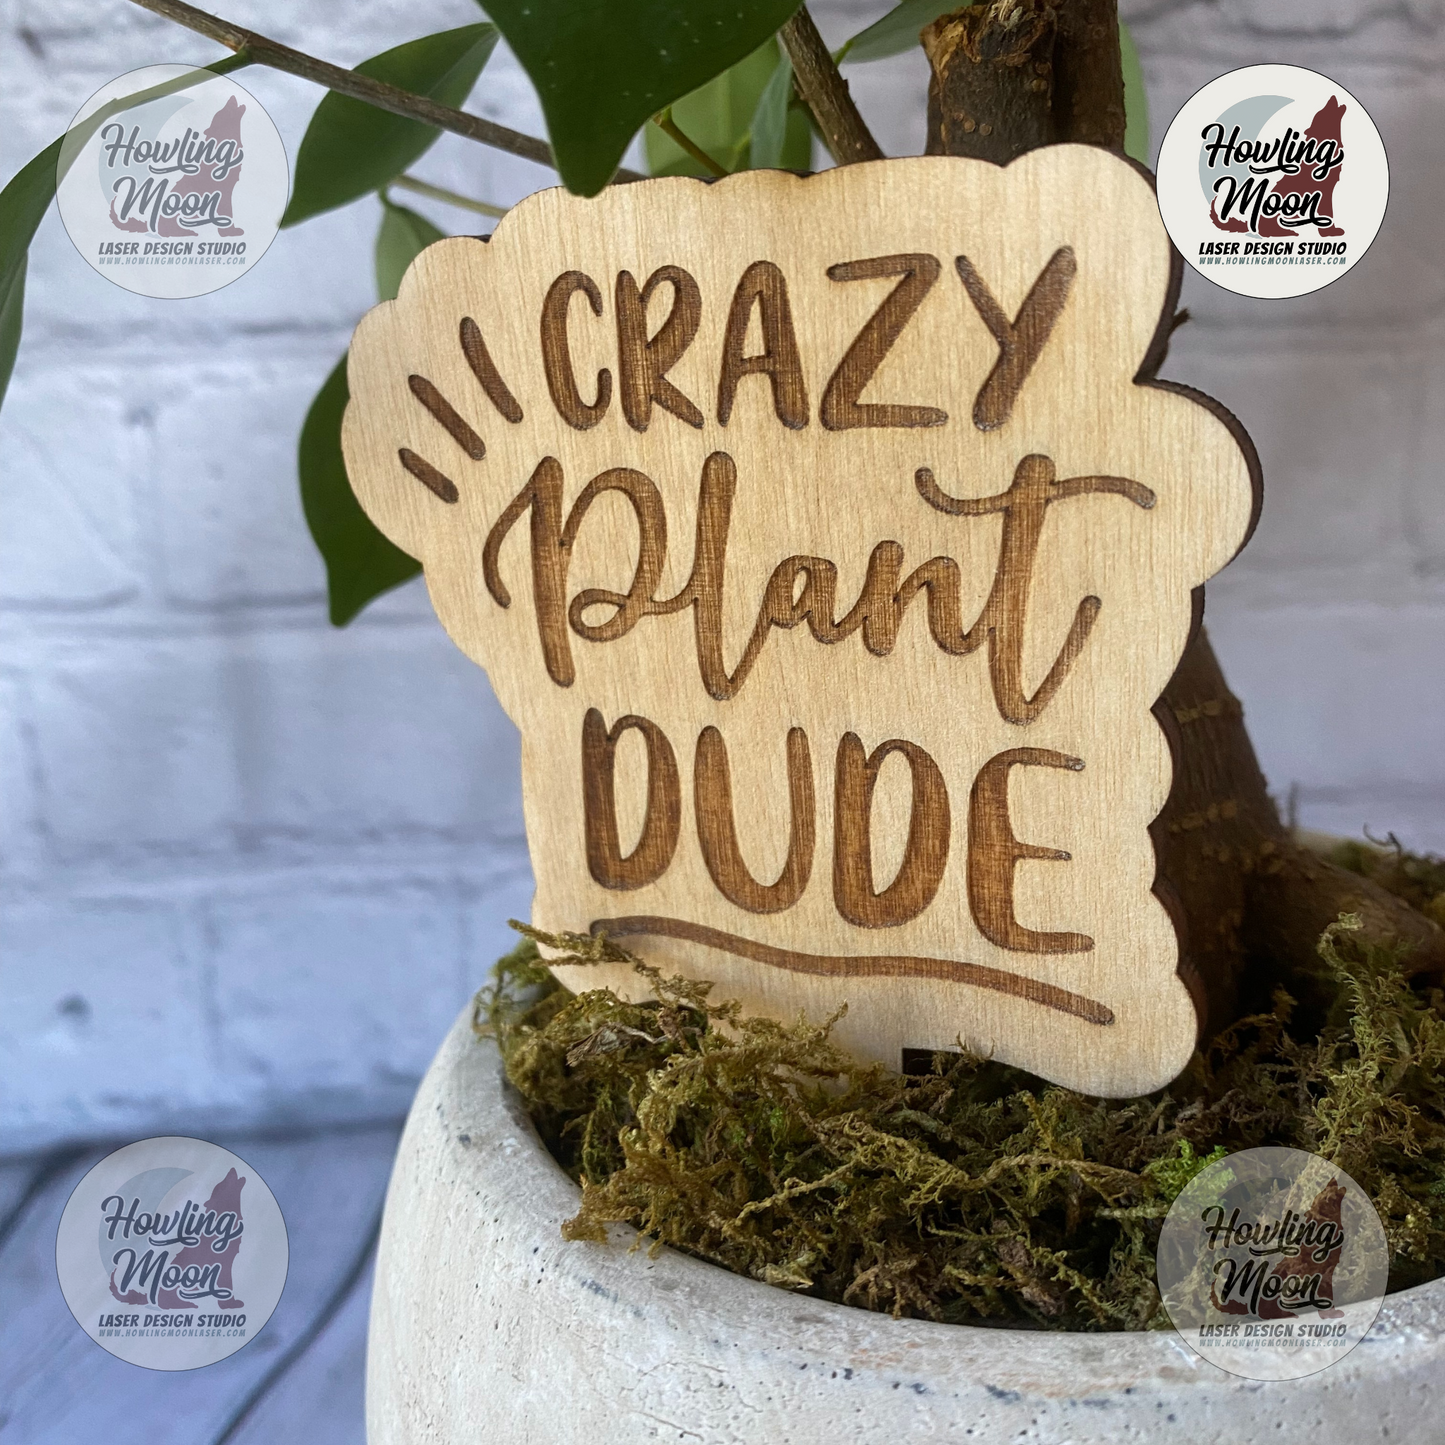 Crazy Plant Dude Garden Stake is a great gift for Gardeners - handmade by Howling Moon Laser Design in Virginia USA.